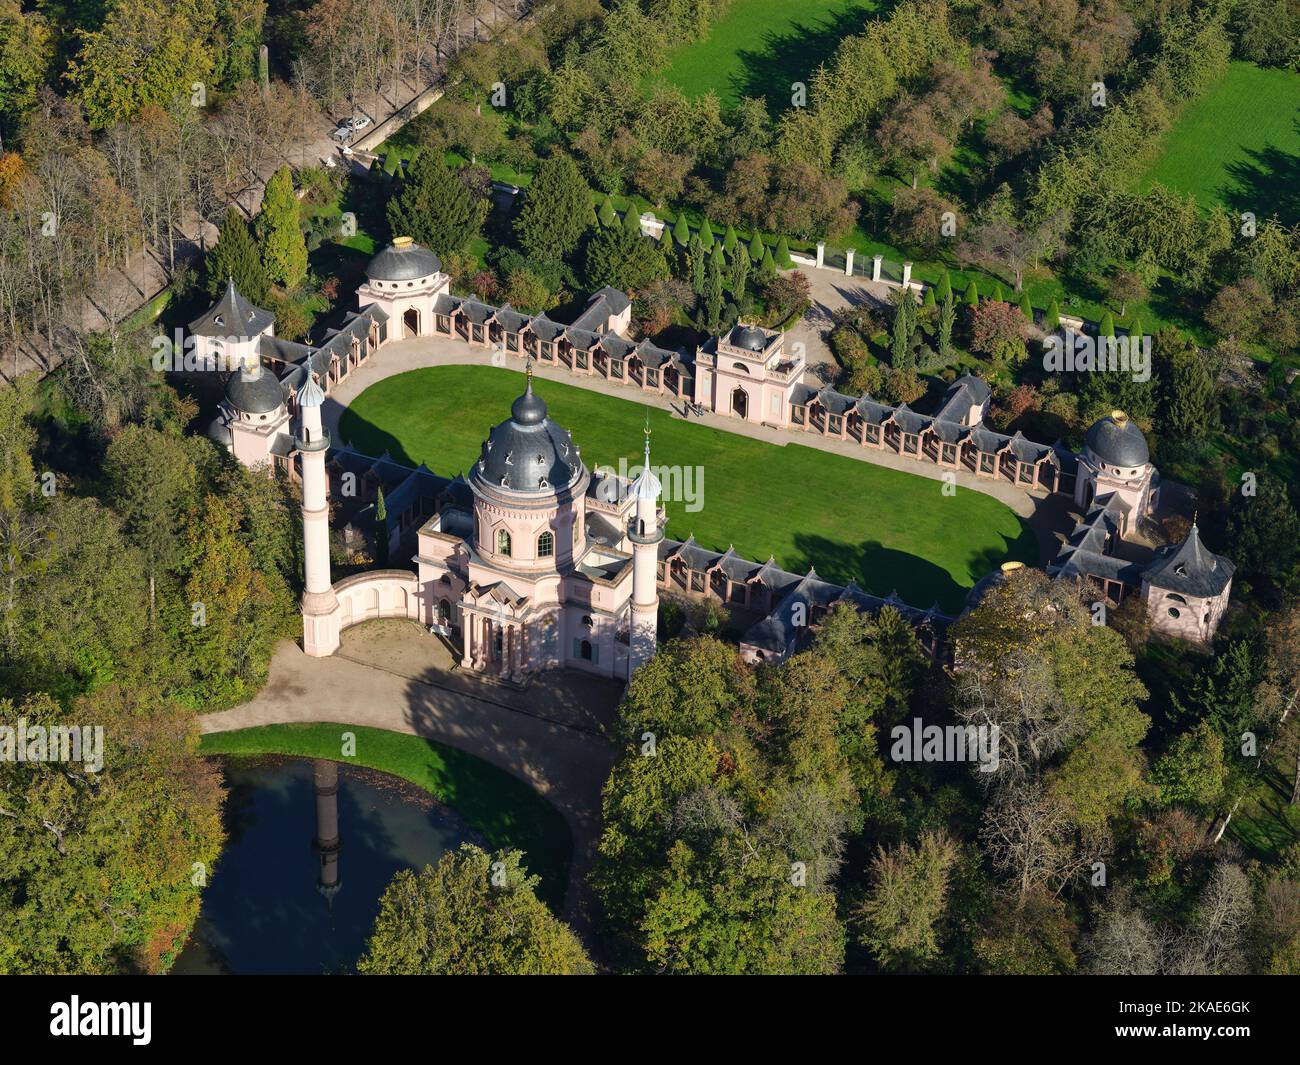 AERIAL VIEW. The Mosque in the garden of the Schwetzingen Palace. Baden-Württemberg, Germany. Stock Photo